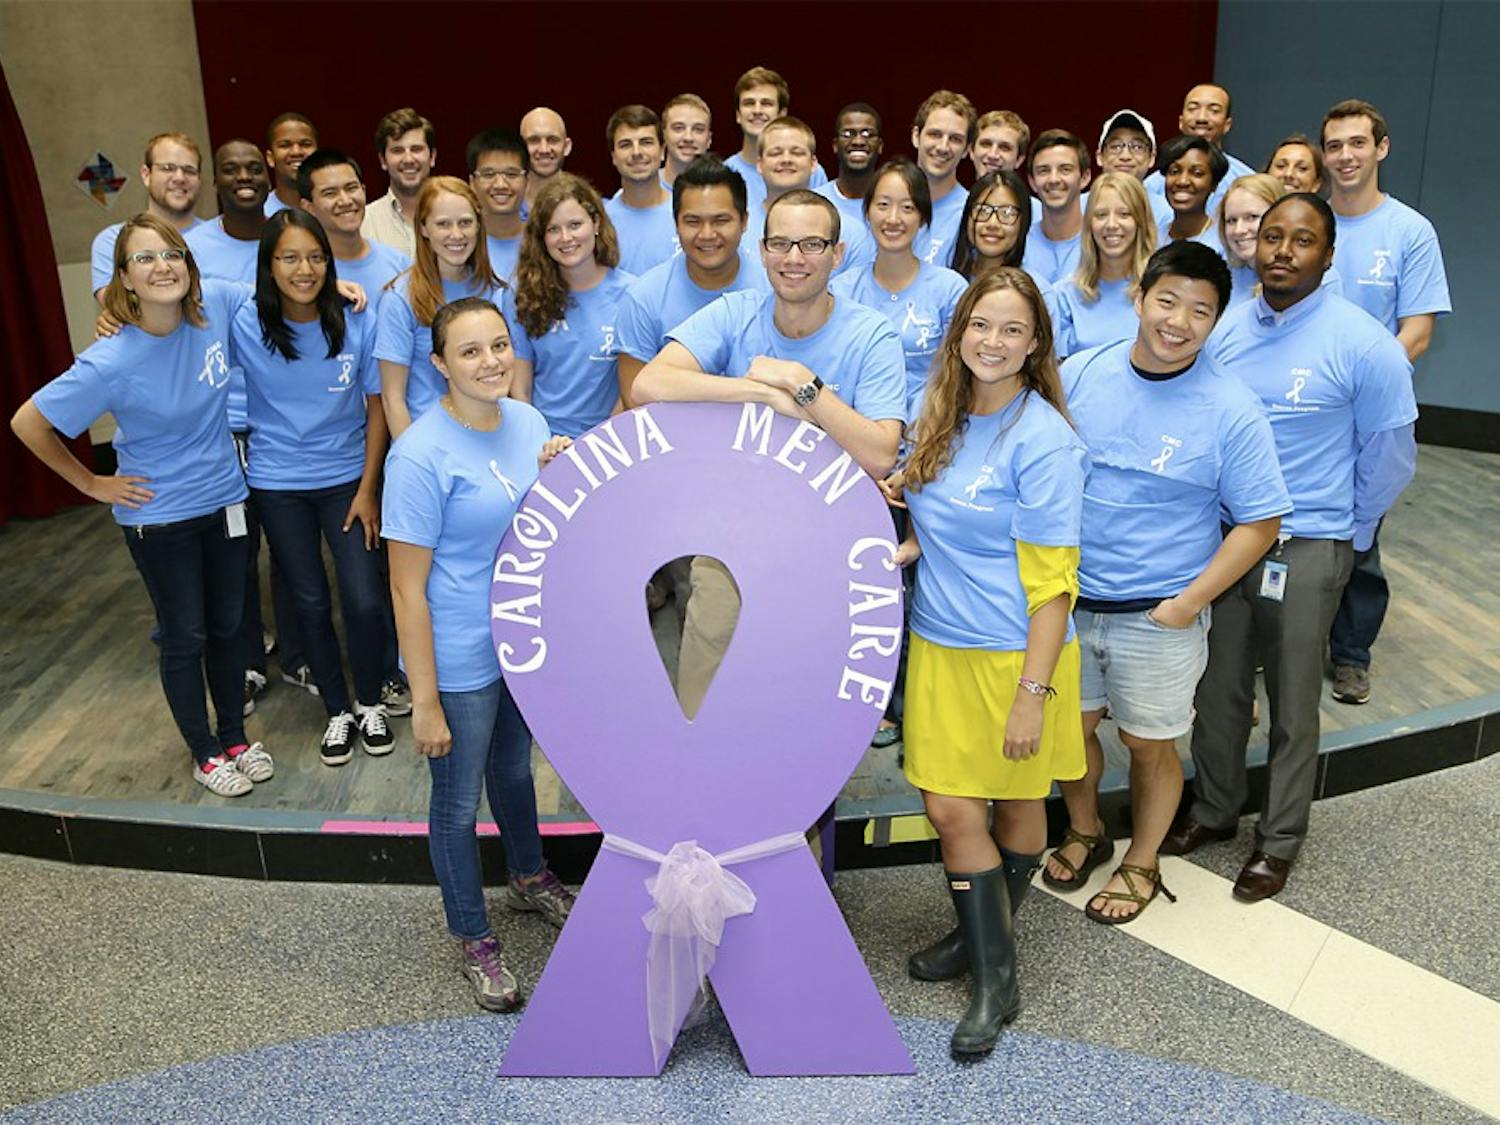 UNC School of Medicine students show their support for Carolina Men Care and its mission to increase the discussion on interpersonal violence. Courtesy of Graham Mulvaney.